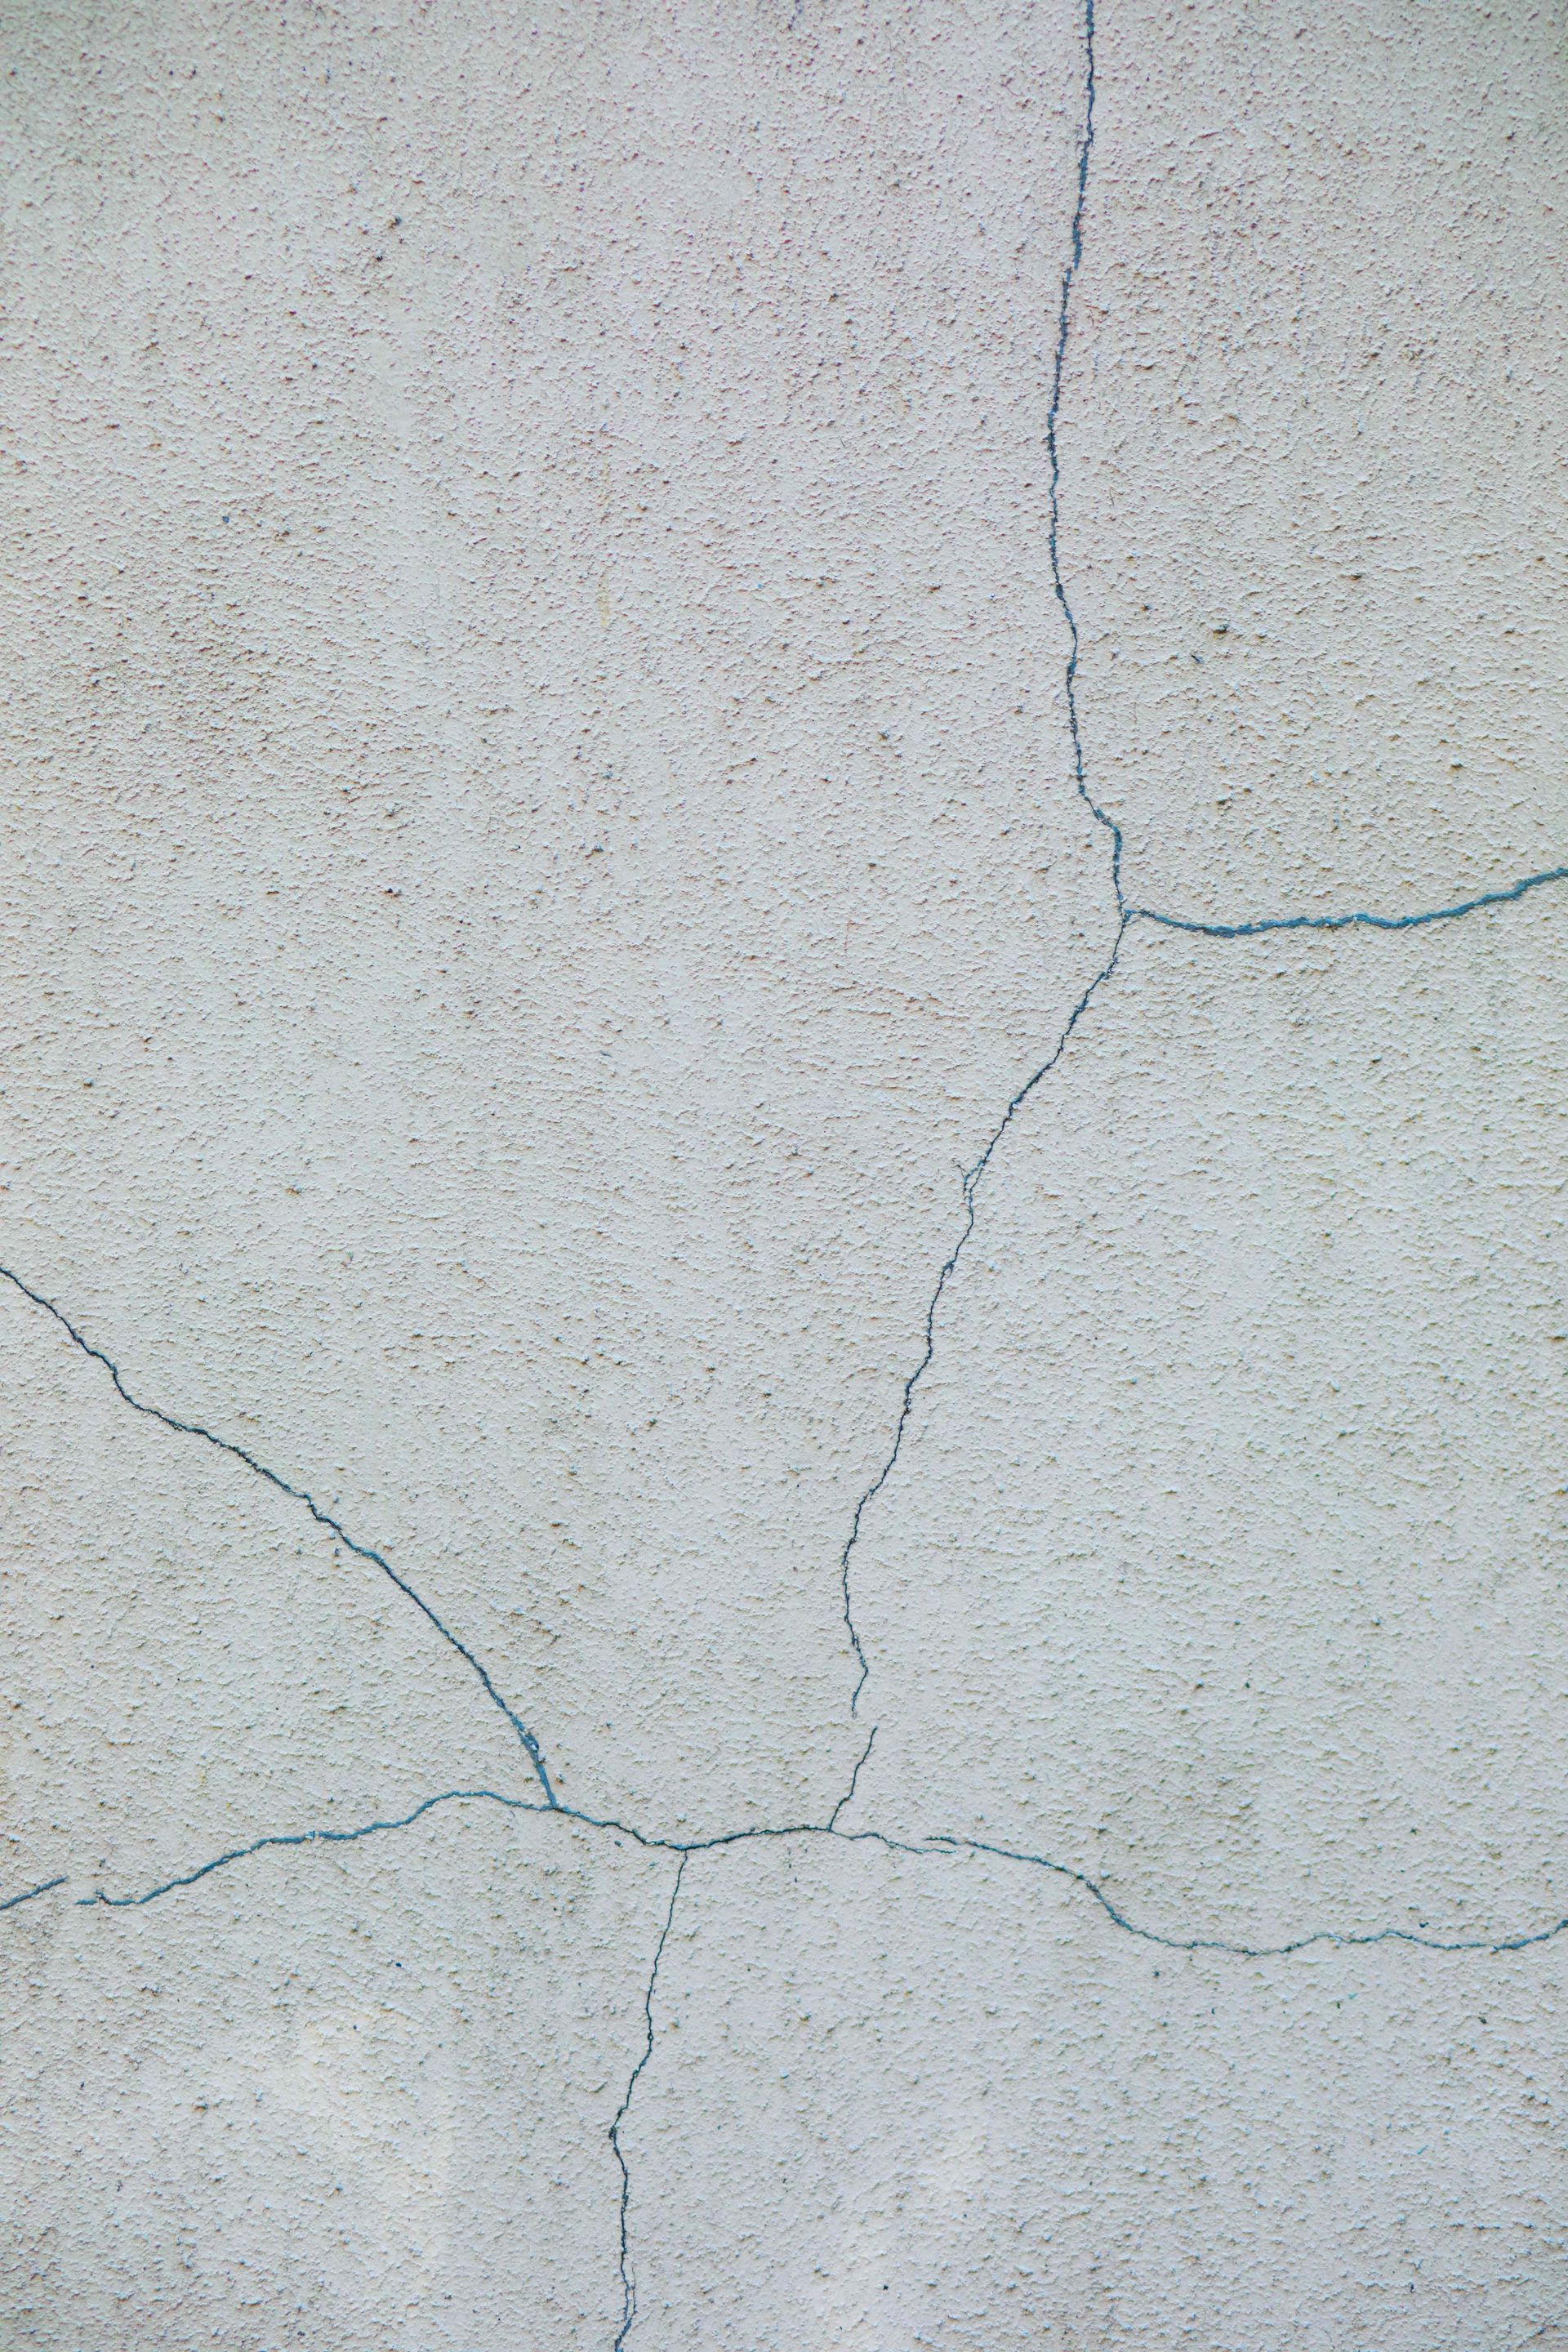 Hairline Cracks In House Concrete Foundation Need Repair